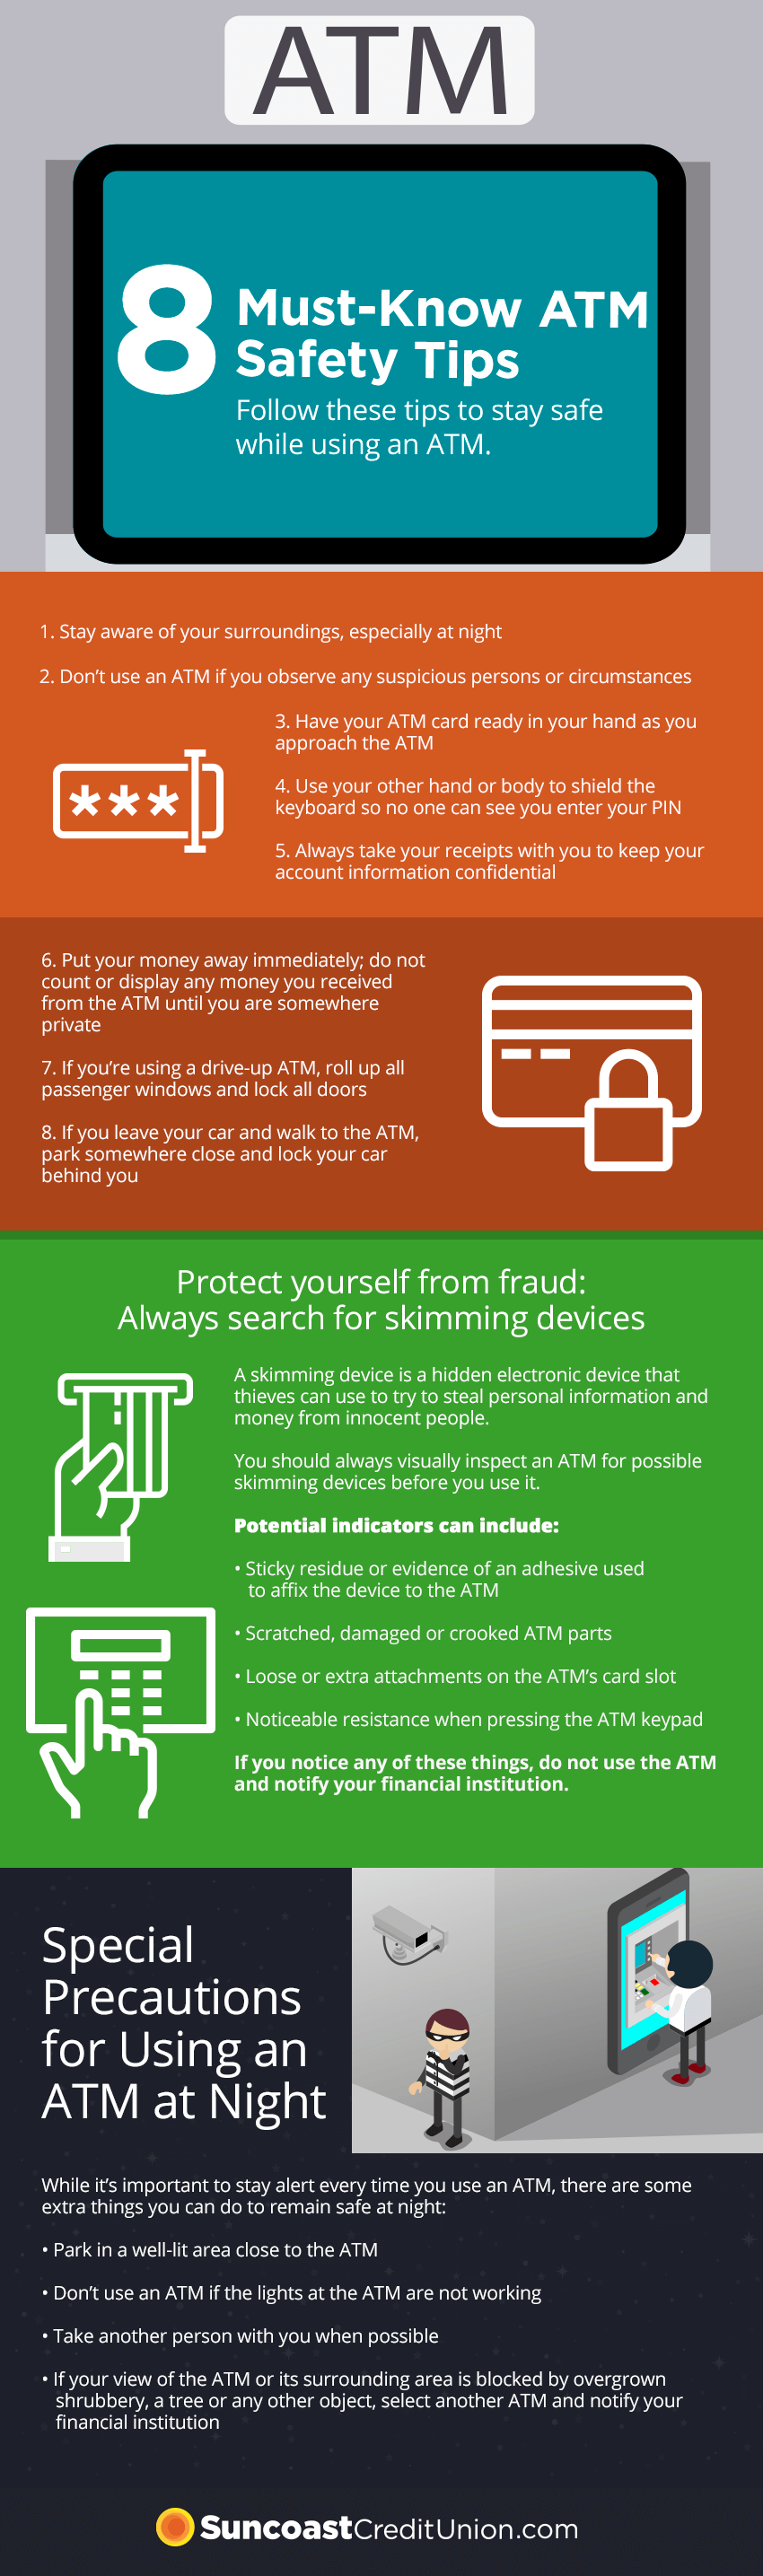 1.	Stay aware of your surroundings, especially at night 2.	Don’t use an ATM if you observe any suspicious persons or circumstances 3.	Have your ATM card ready in your hand as you approach the ATM  4.	Use your other hand or body to shield the keyboard so no one can see you enter your PIN 5.	Always take your receipts with you to keep your account information confidential 6.	Put your money away immediately; do not count or display any money you received from the ATM until you are somewhere private 7.	If you’re using a drive-up ATM, roll up all passenger windows and lock all doors  8.	If you leave your car and walk to the ATM, park somewhere close and lock your car behind you